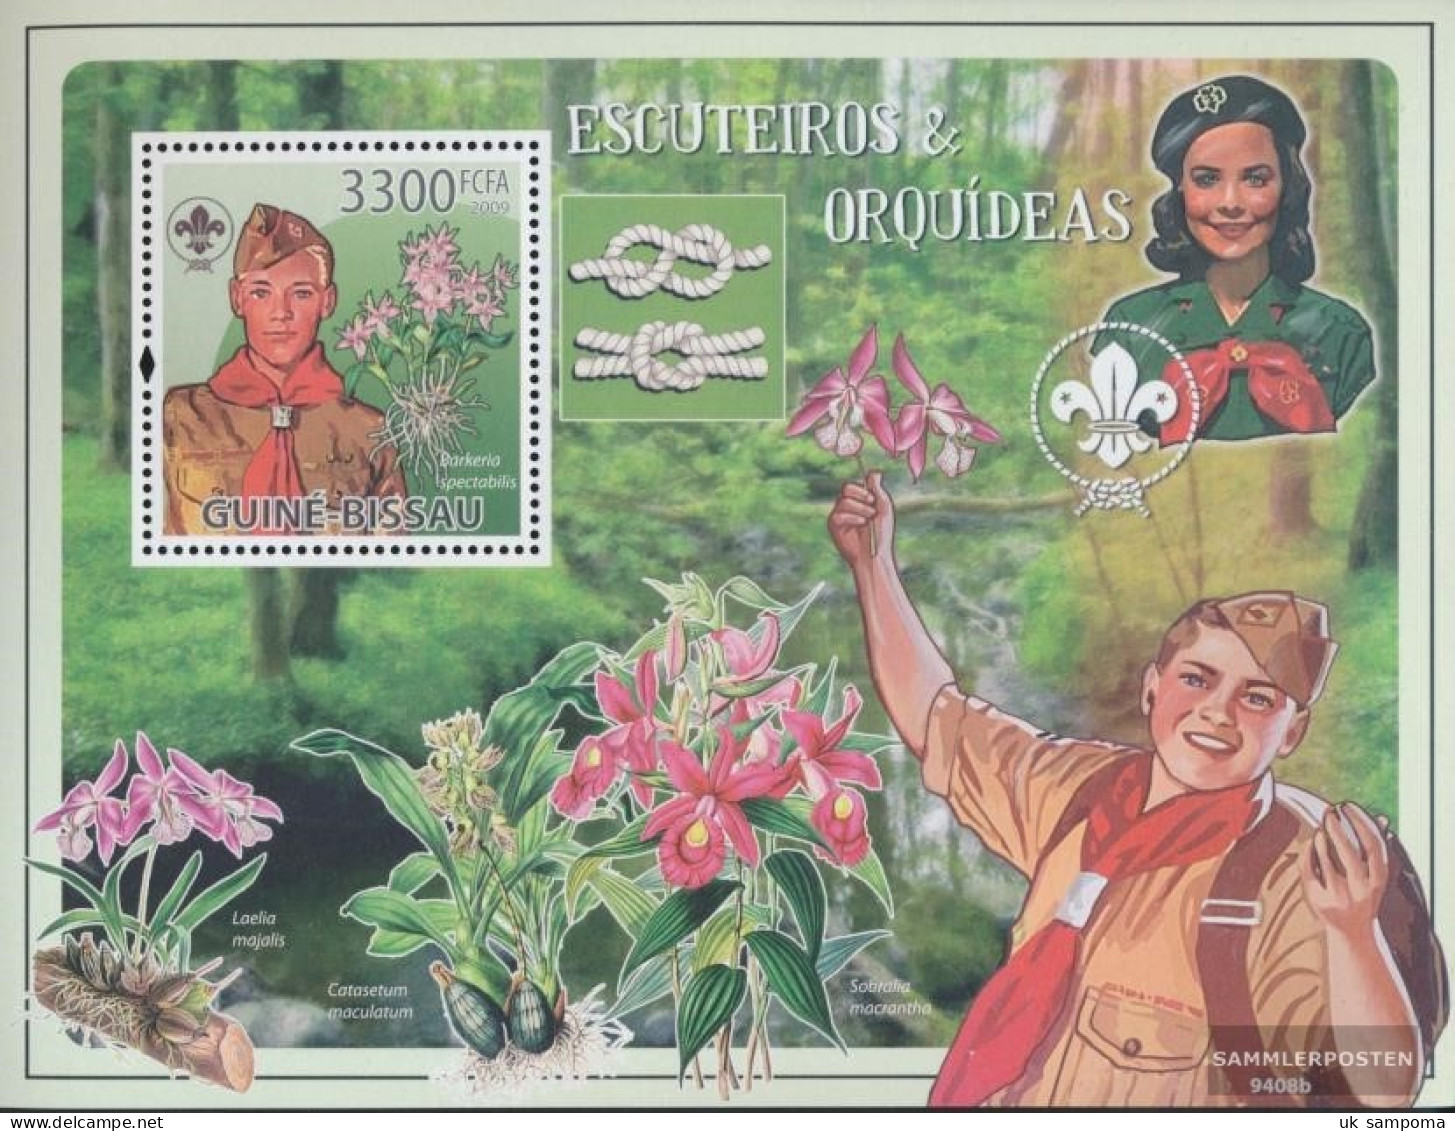 Guinea-Bissau Miniature Sheet 707 (complete. Issue) Unmounted Mint / Never Hinged 2009 Scouts & Orchids - Guinea-Bissau